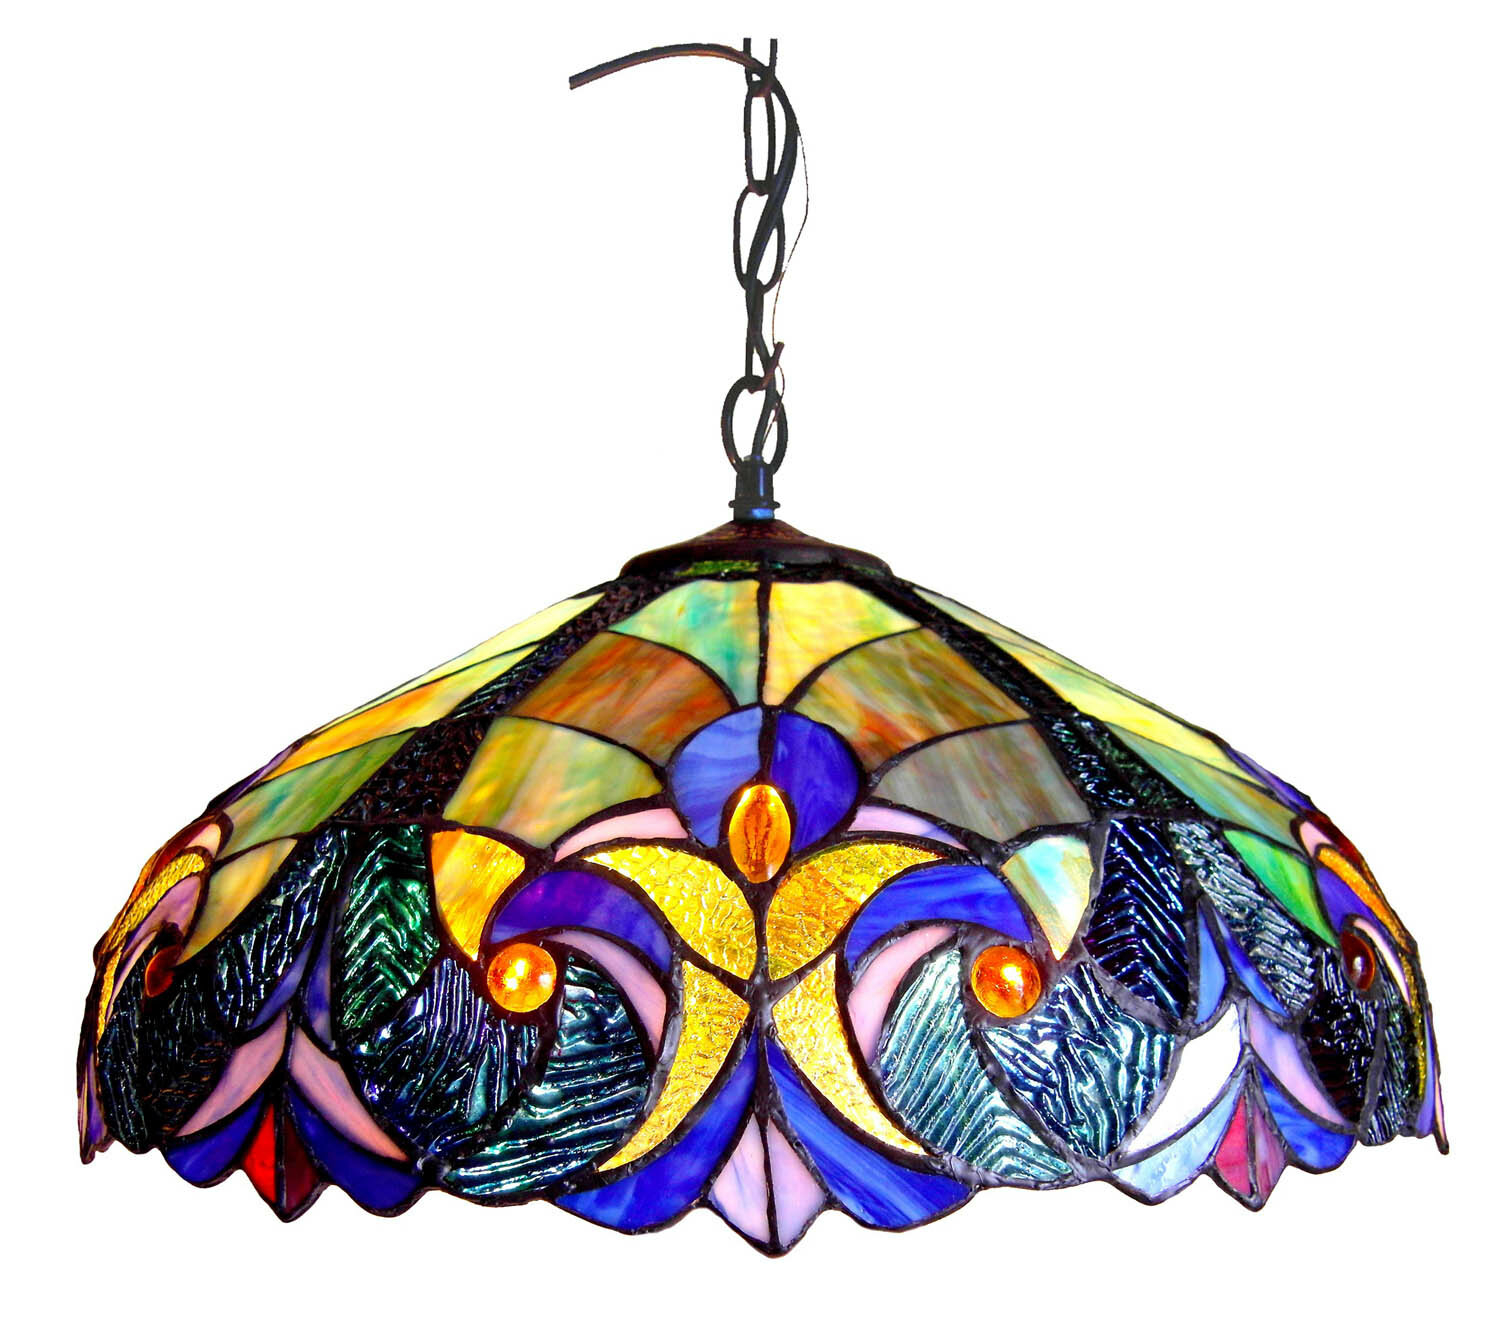 Tiffany style stained glass hanging ceiling pendant light fixture